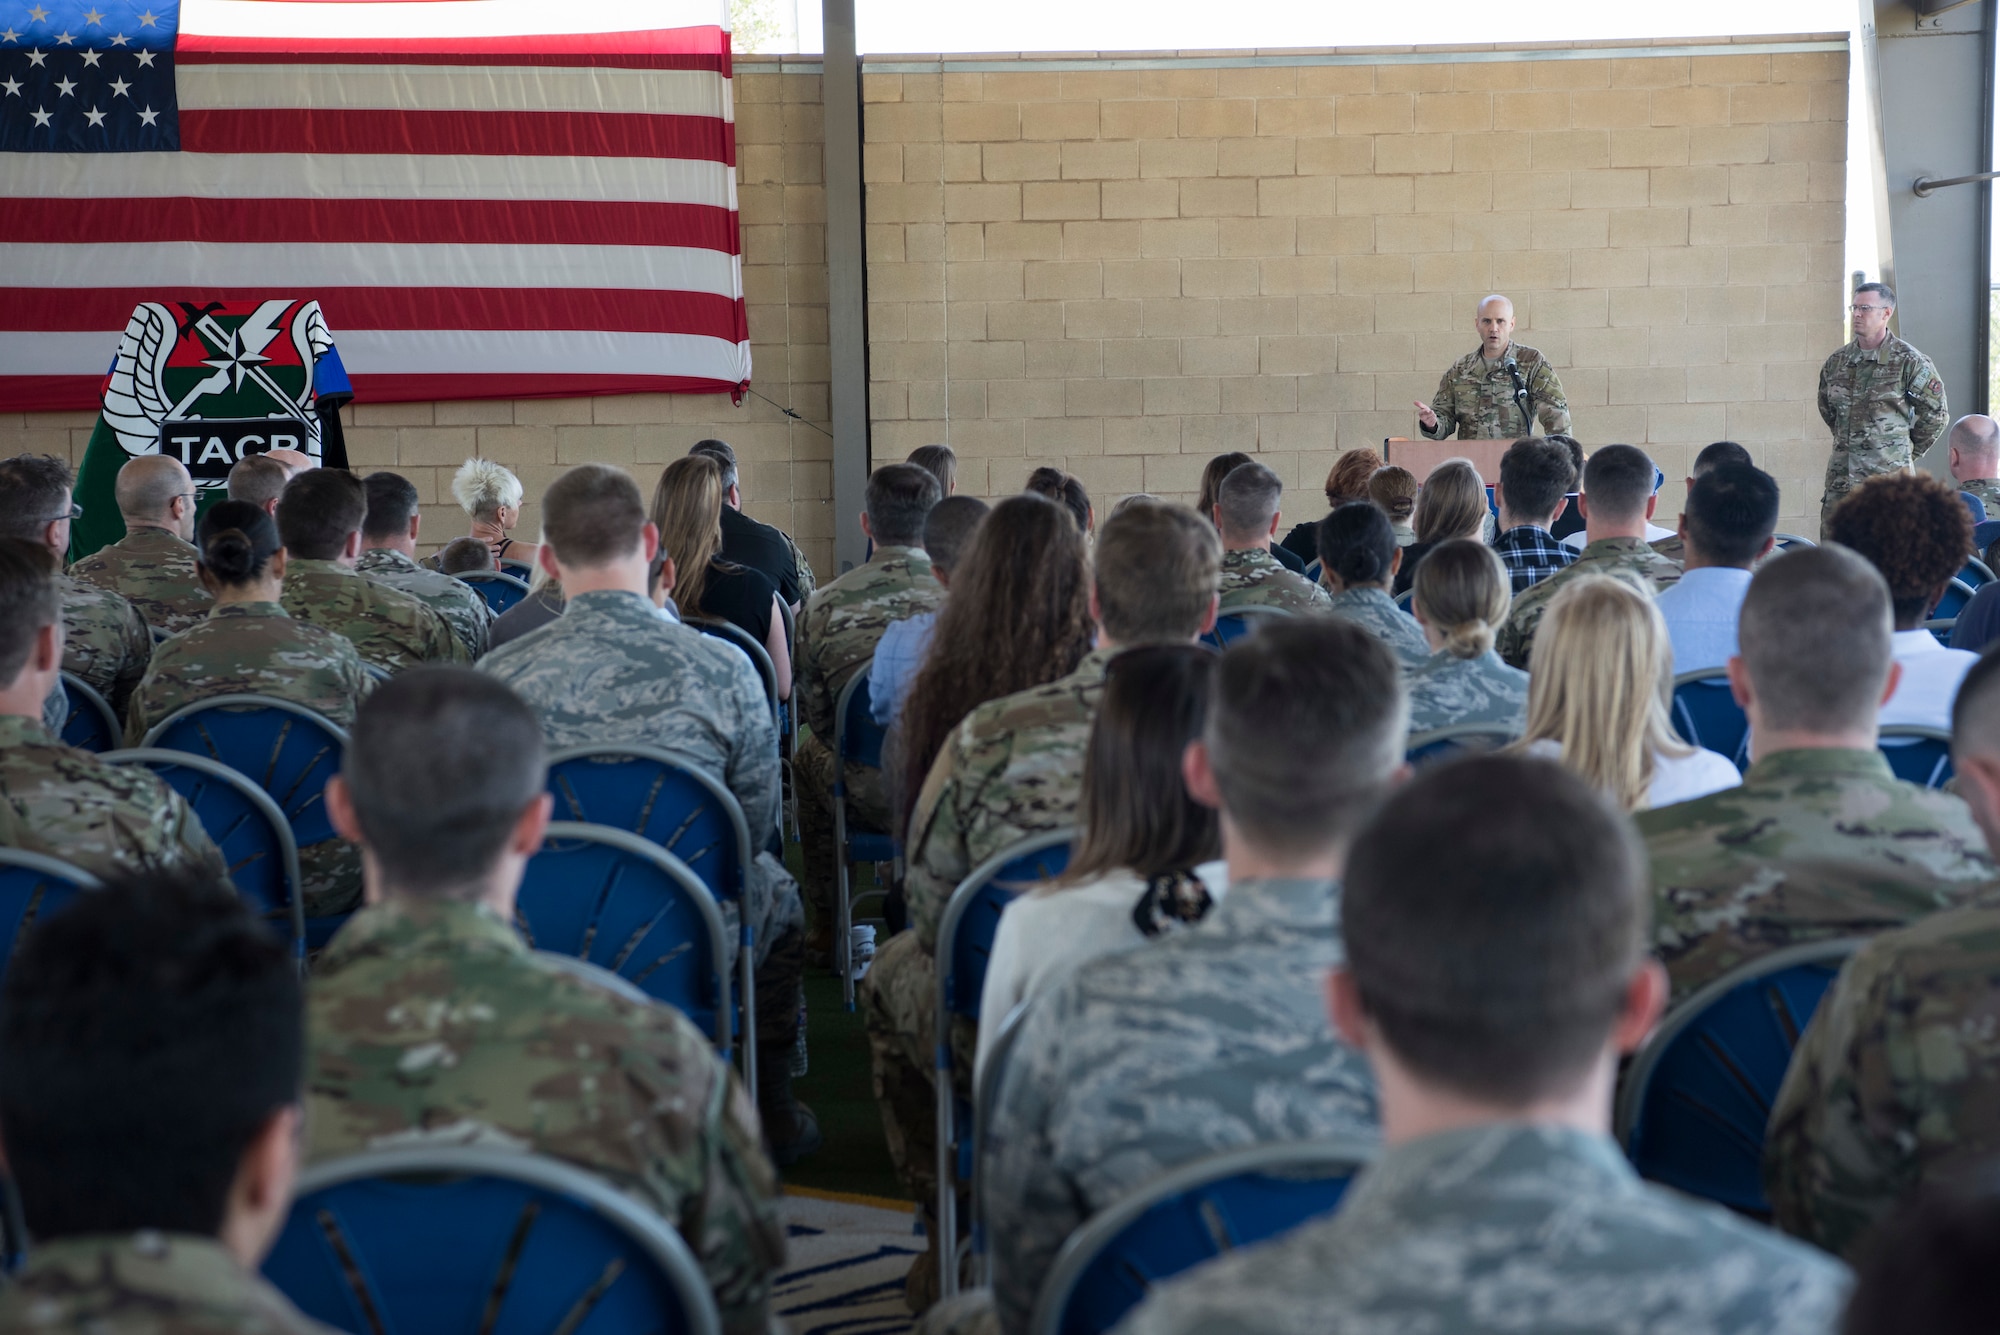 Col. Parks Hughes, Special Warfare Training Wing commander, provides opening remarks during a dedication ceremony April 19 at Joint Base San Antonio-Lackland Medina Annex, Texas.